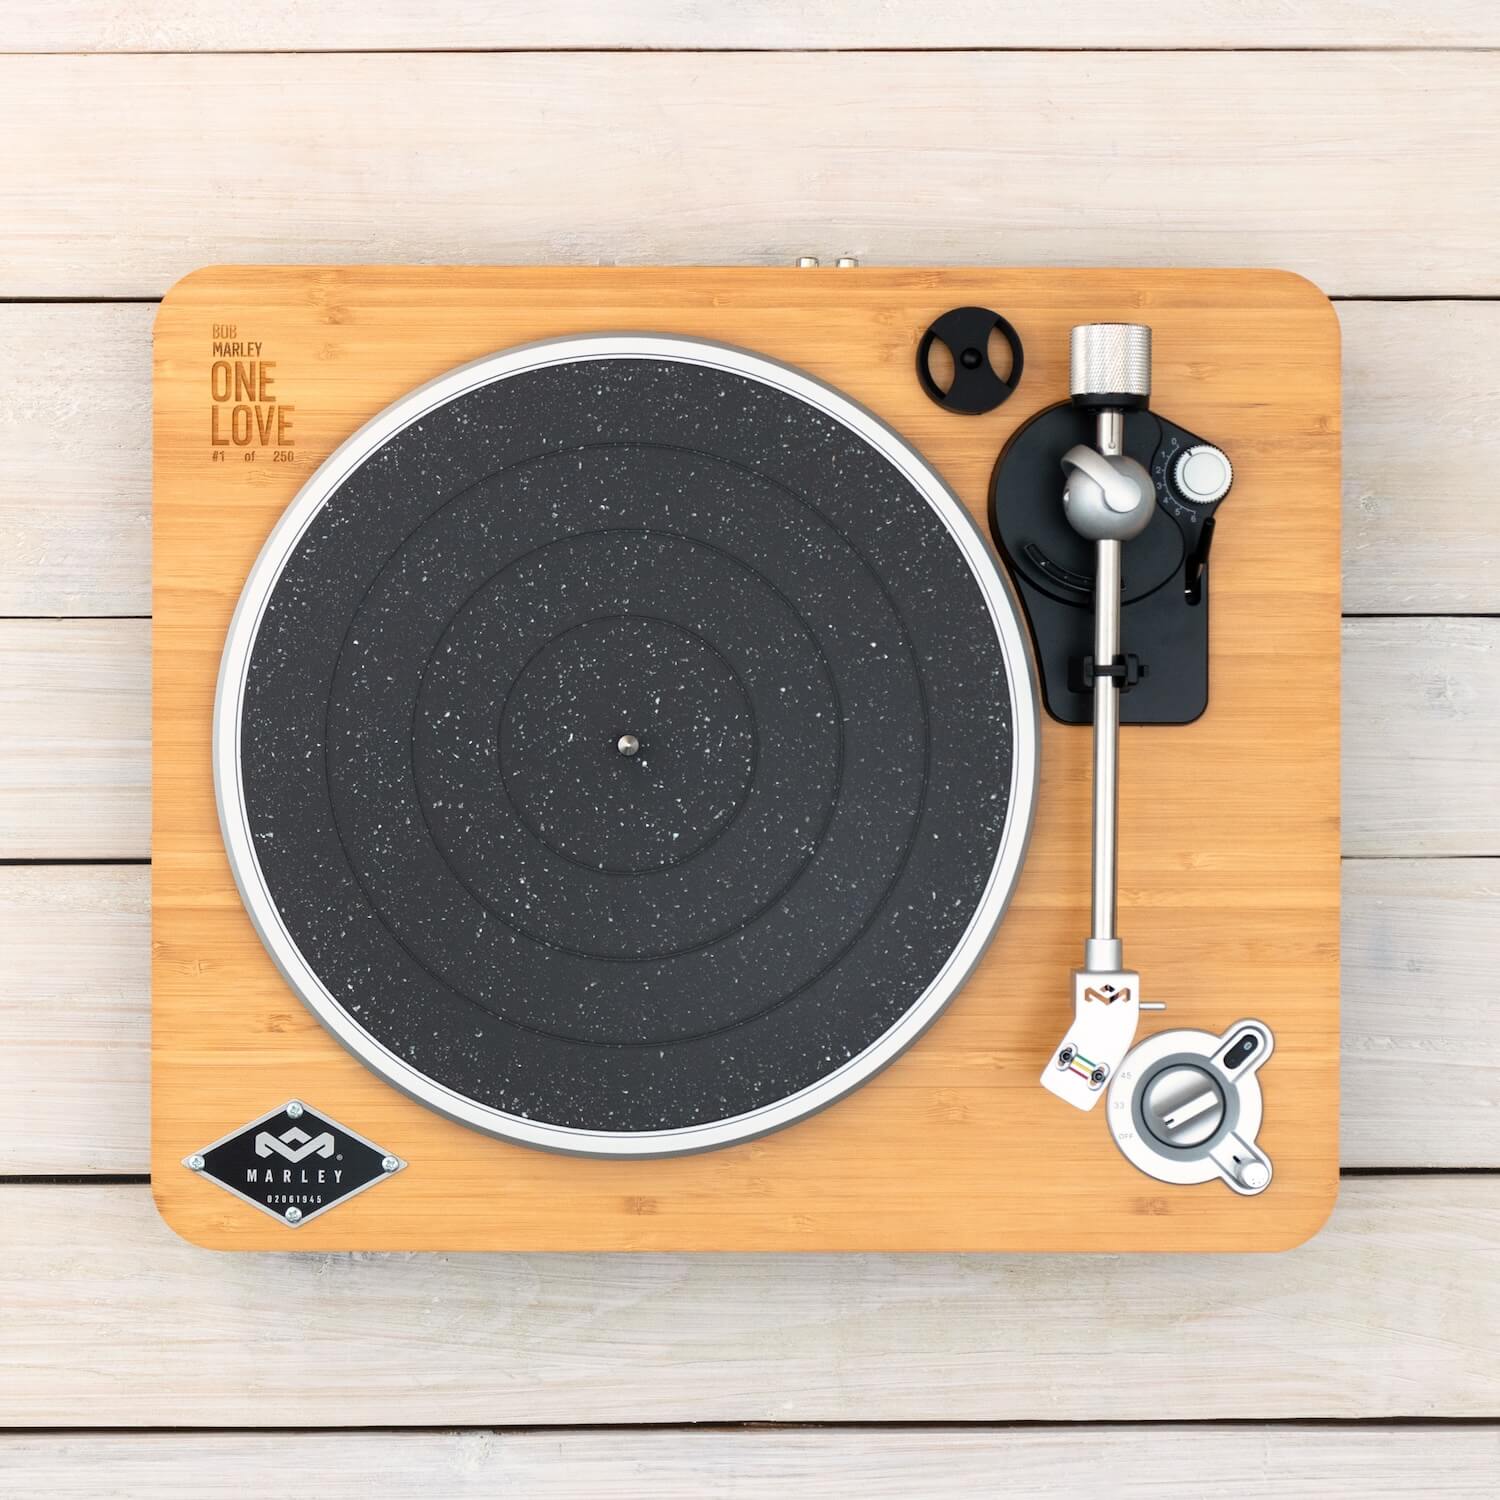 House of Marley One Love turntable